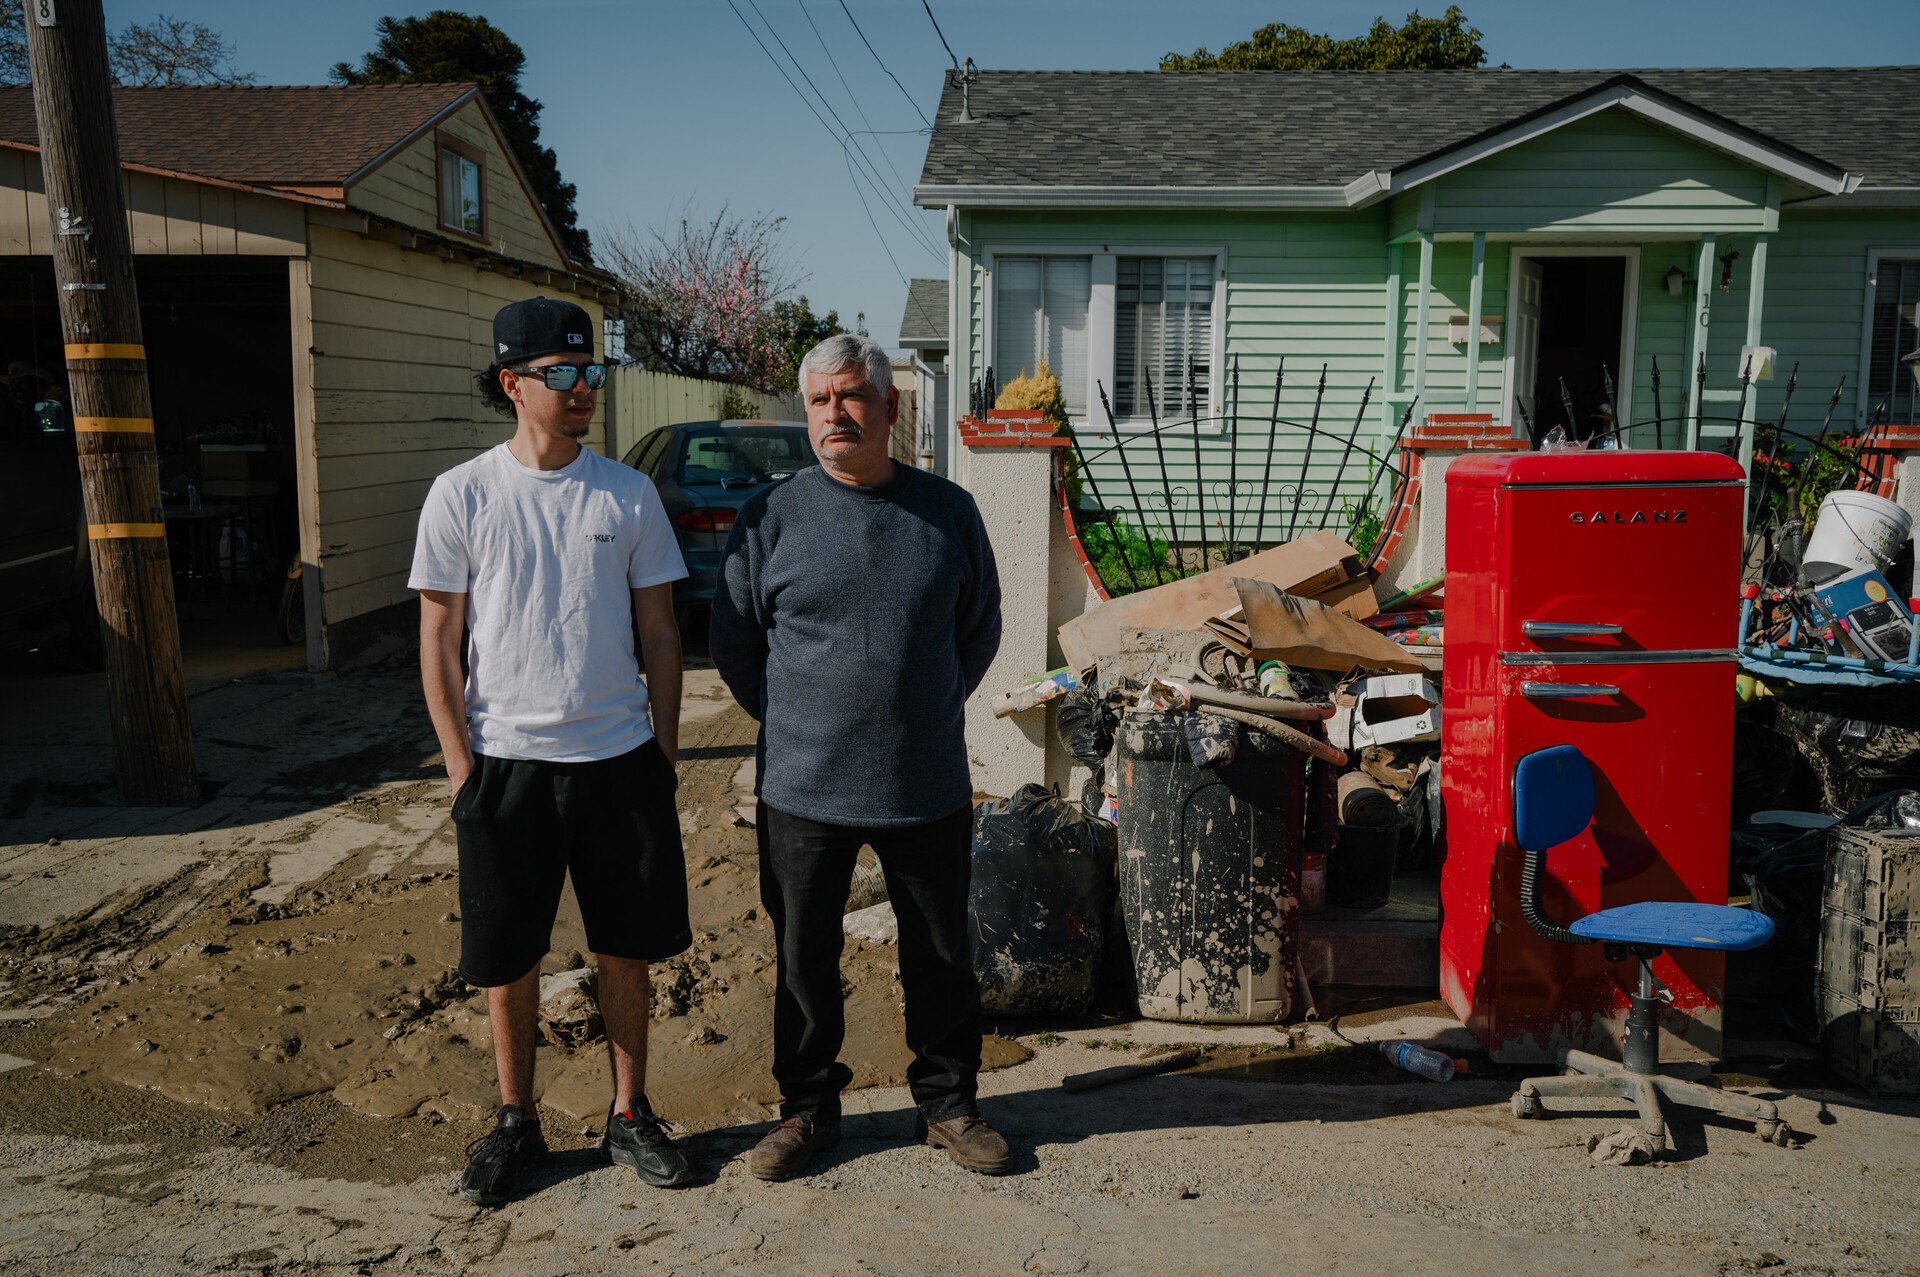 An older man and younger man stand outside a light-green house, next to a pile of mud-damaged belongings, including a red refrigerator and blue office chair.